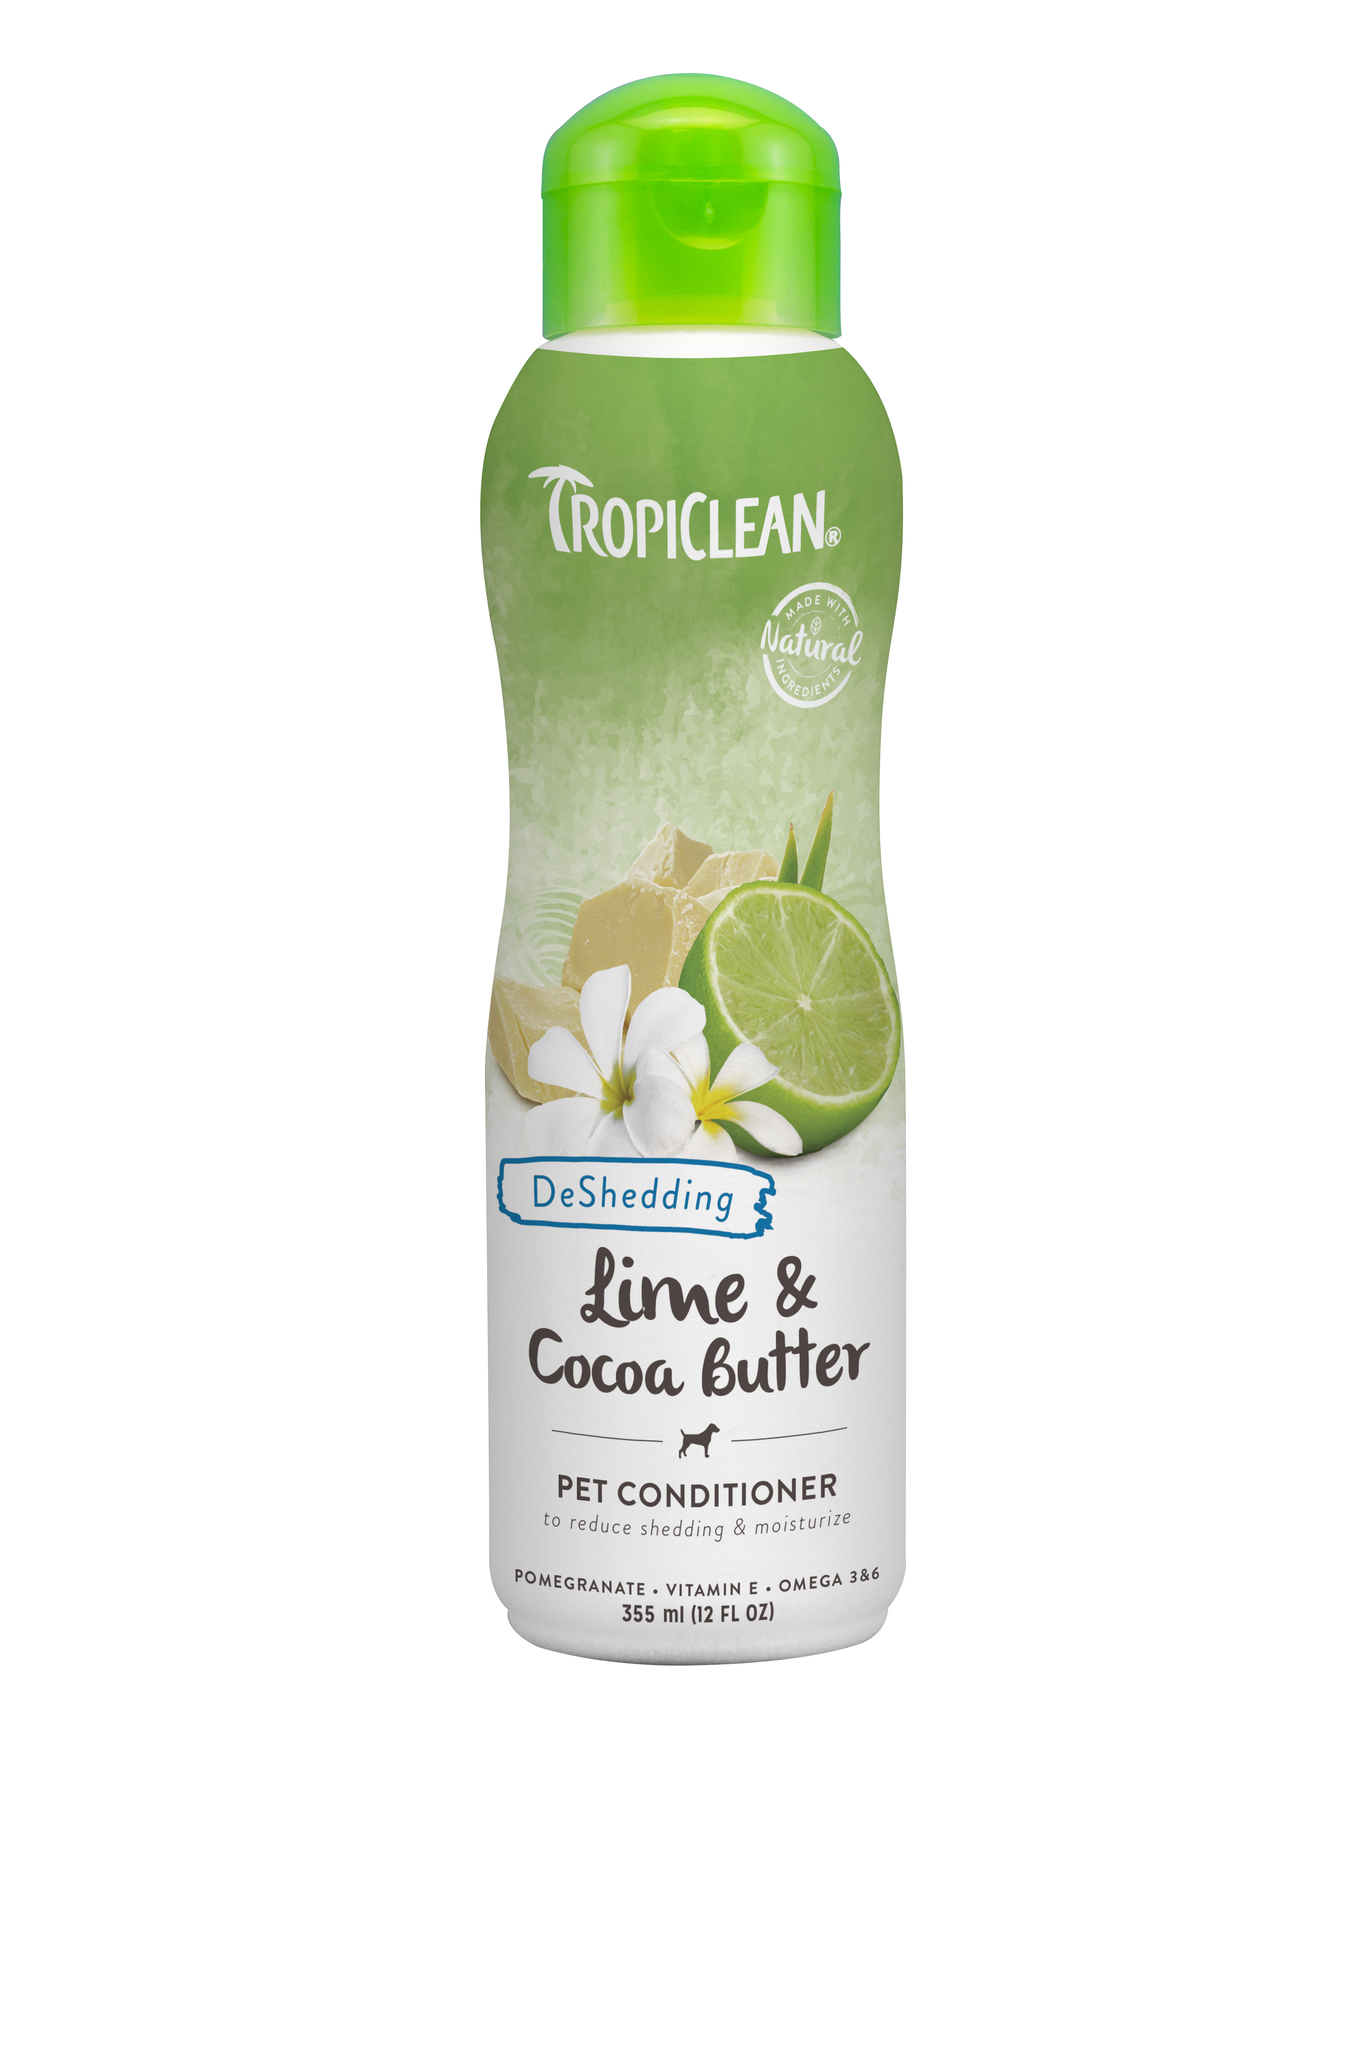 Tropiclean Deshedding Conditioner Lime & Cocoa Butter